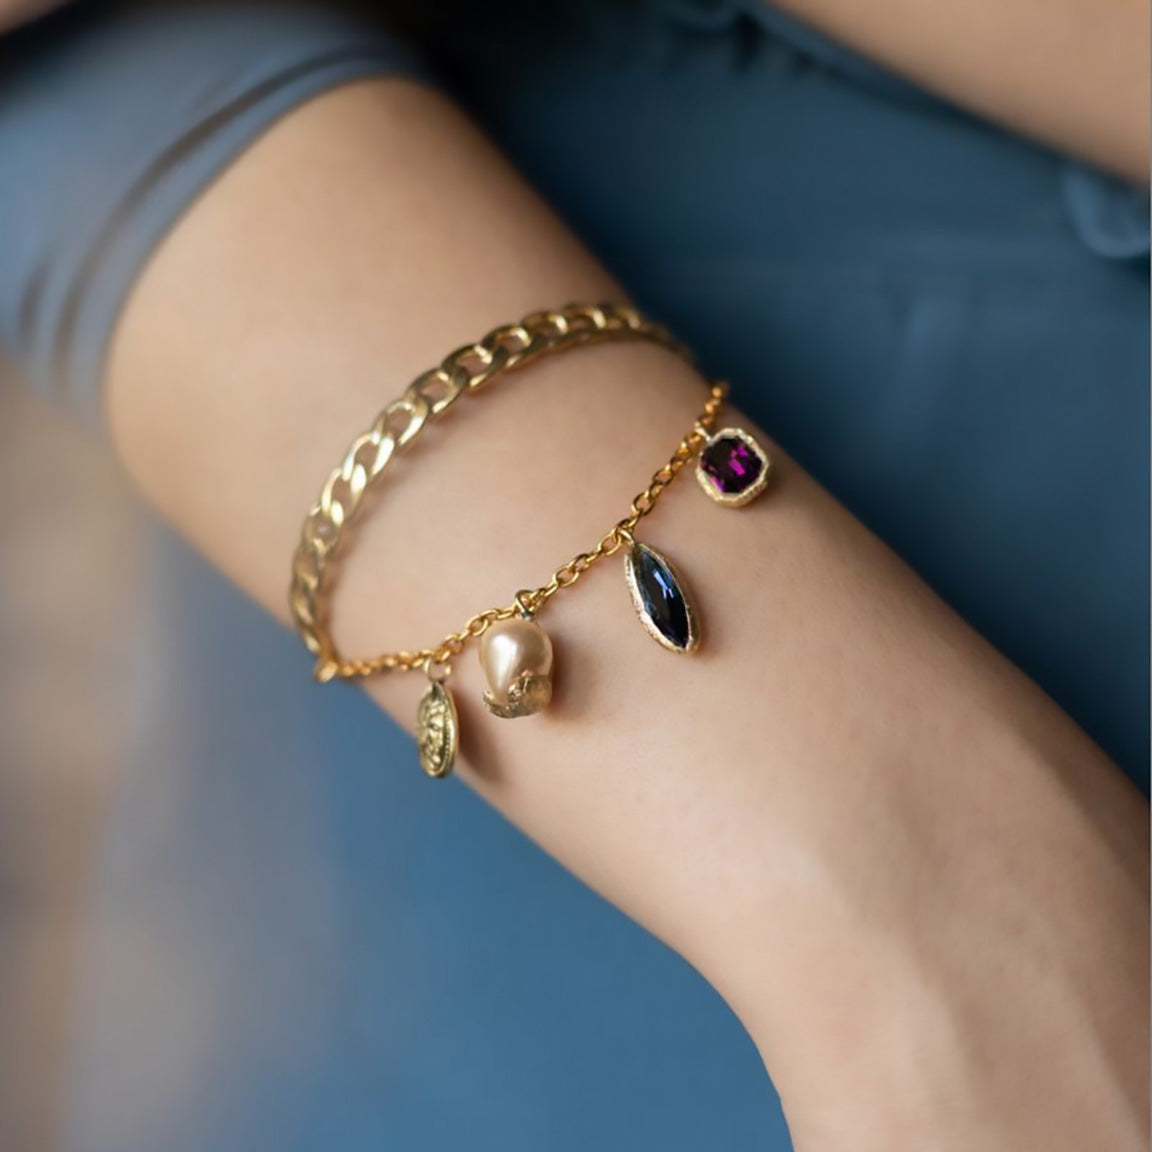 Kalliope Charm Cuff: Handcrafted Elegance from Greece